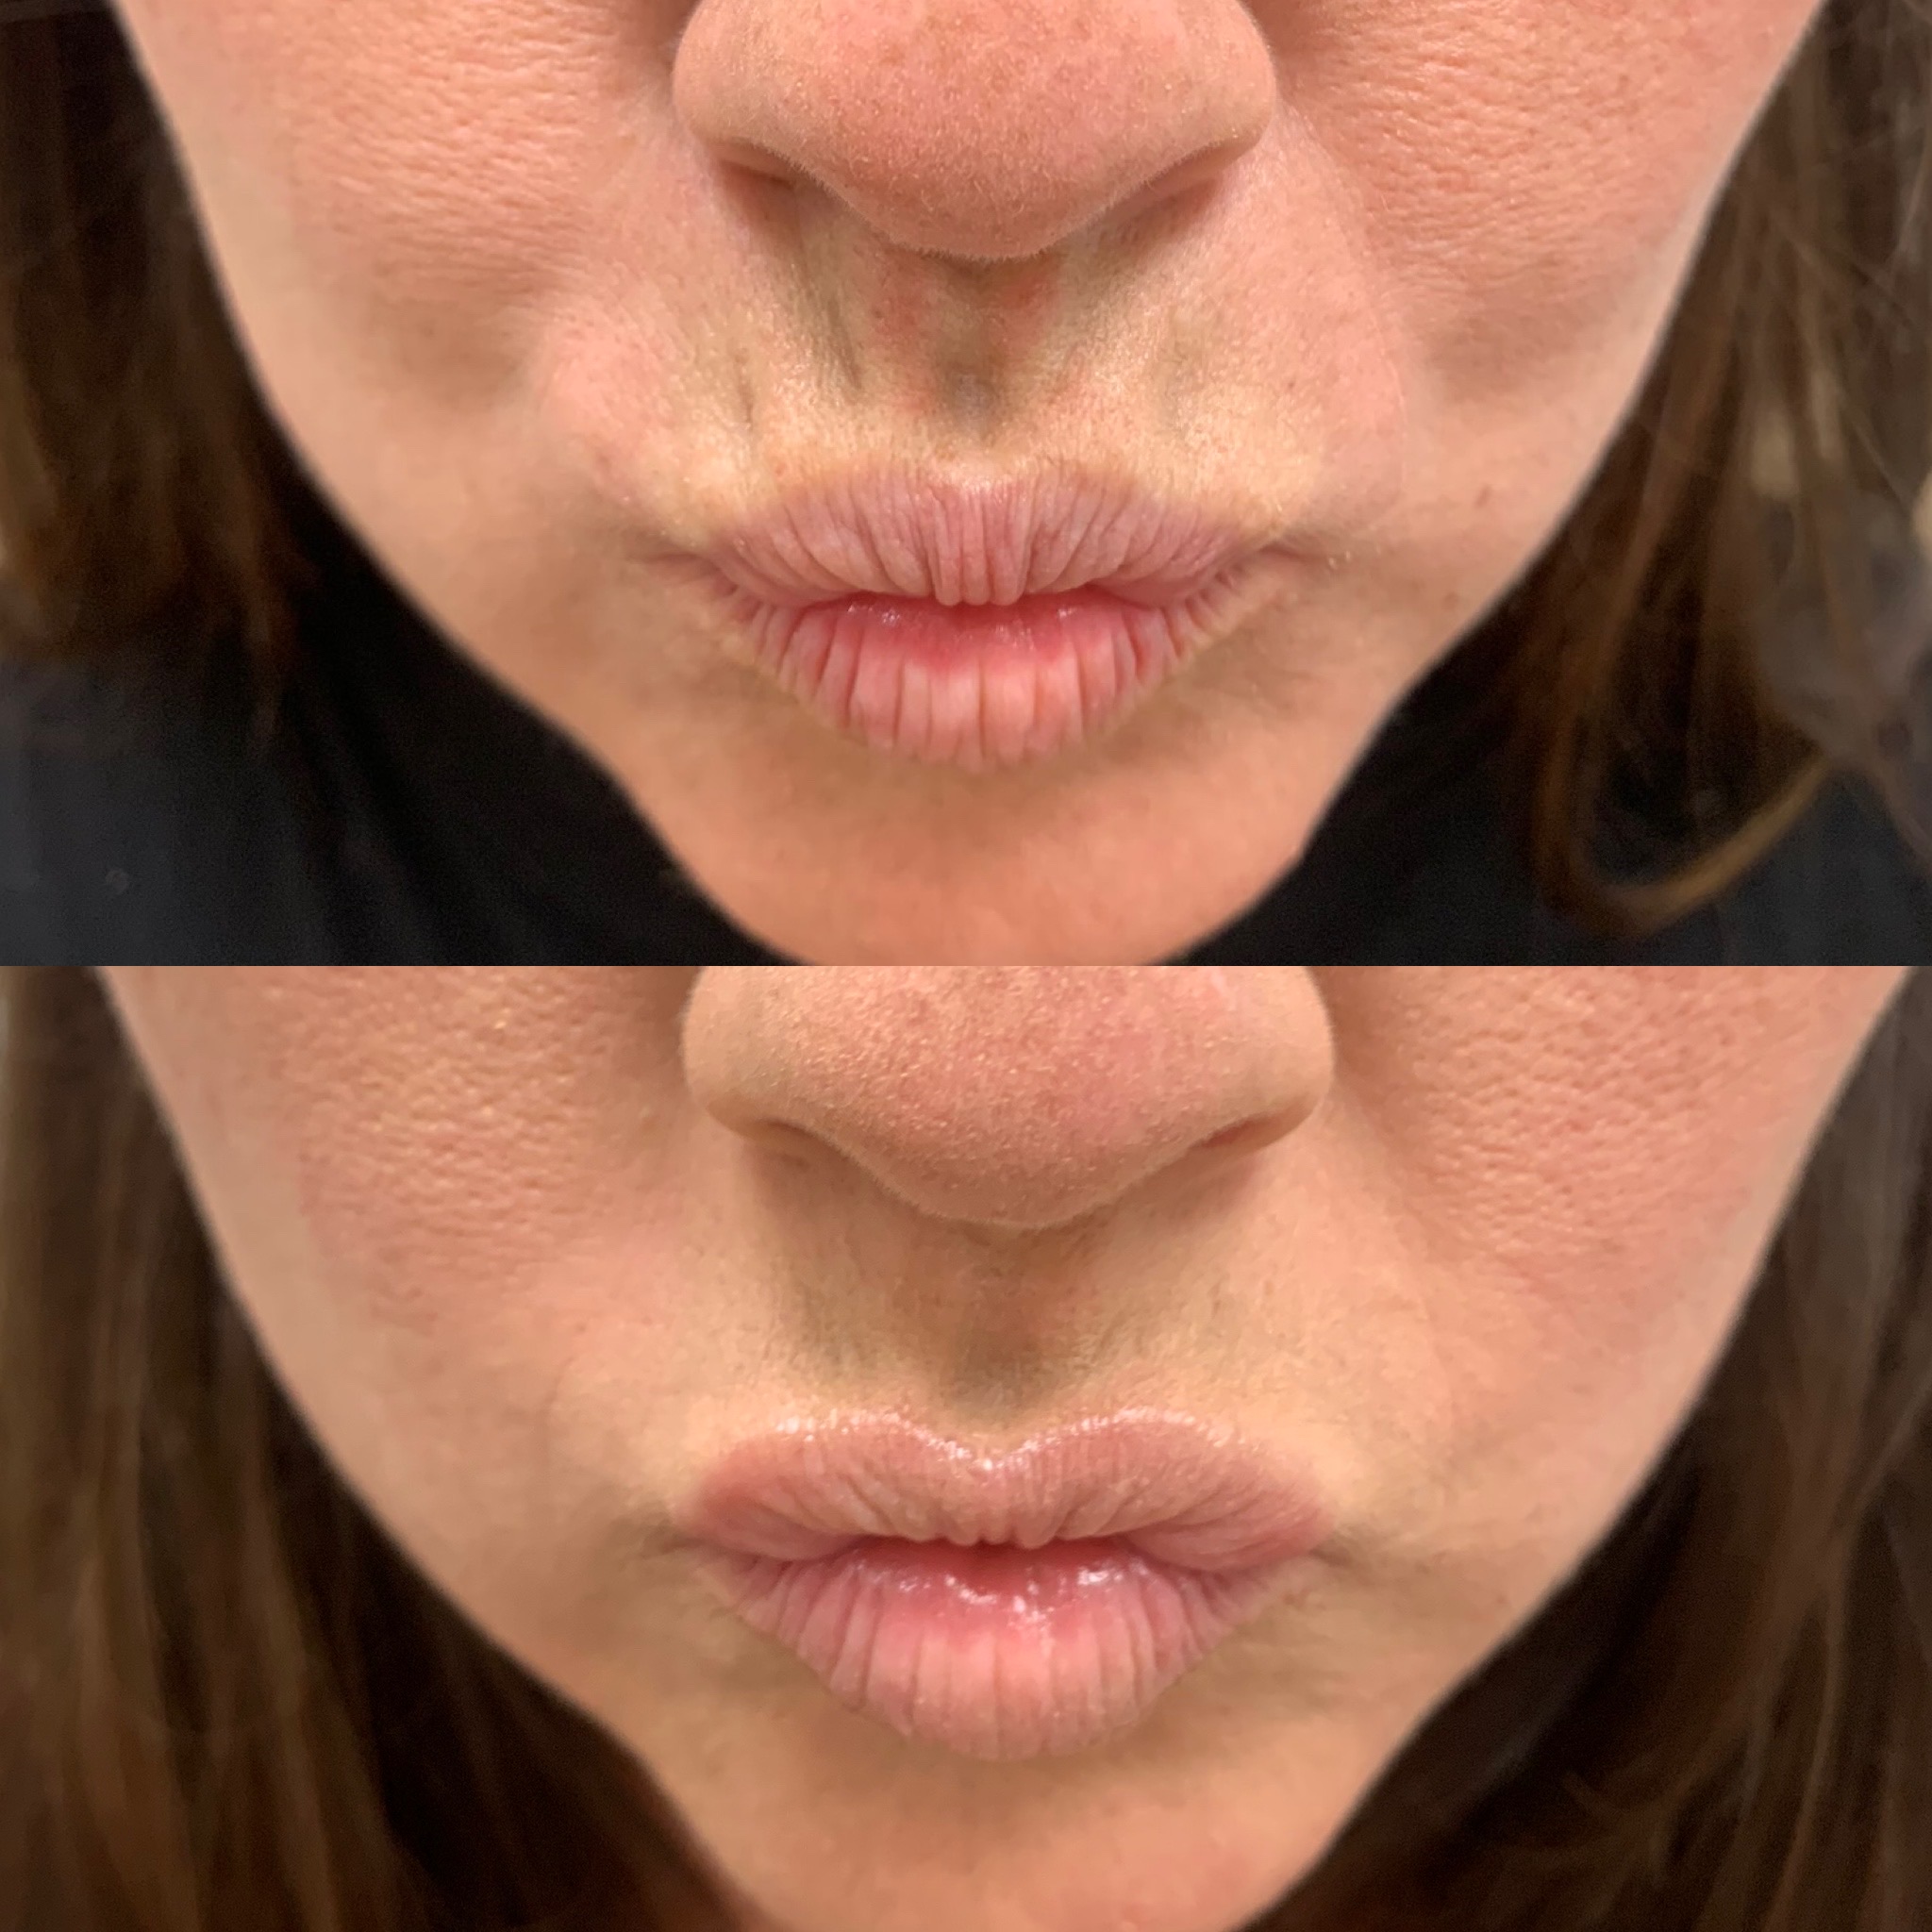 Before and After Botox Treatment on Lip Lines | Beauty Boost Med Spa in Newport Beach, CA